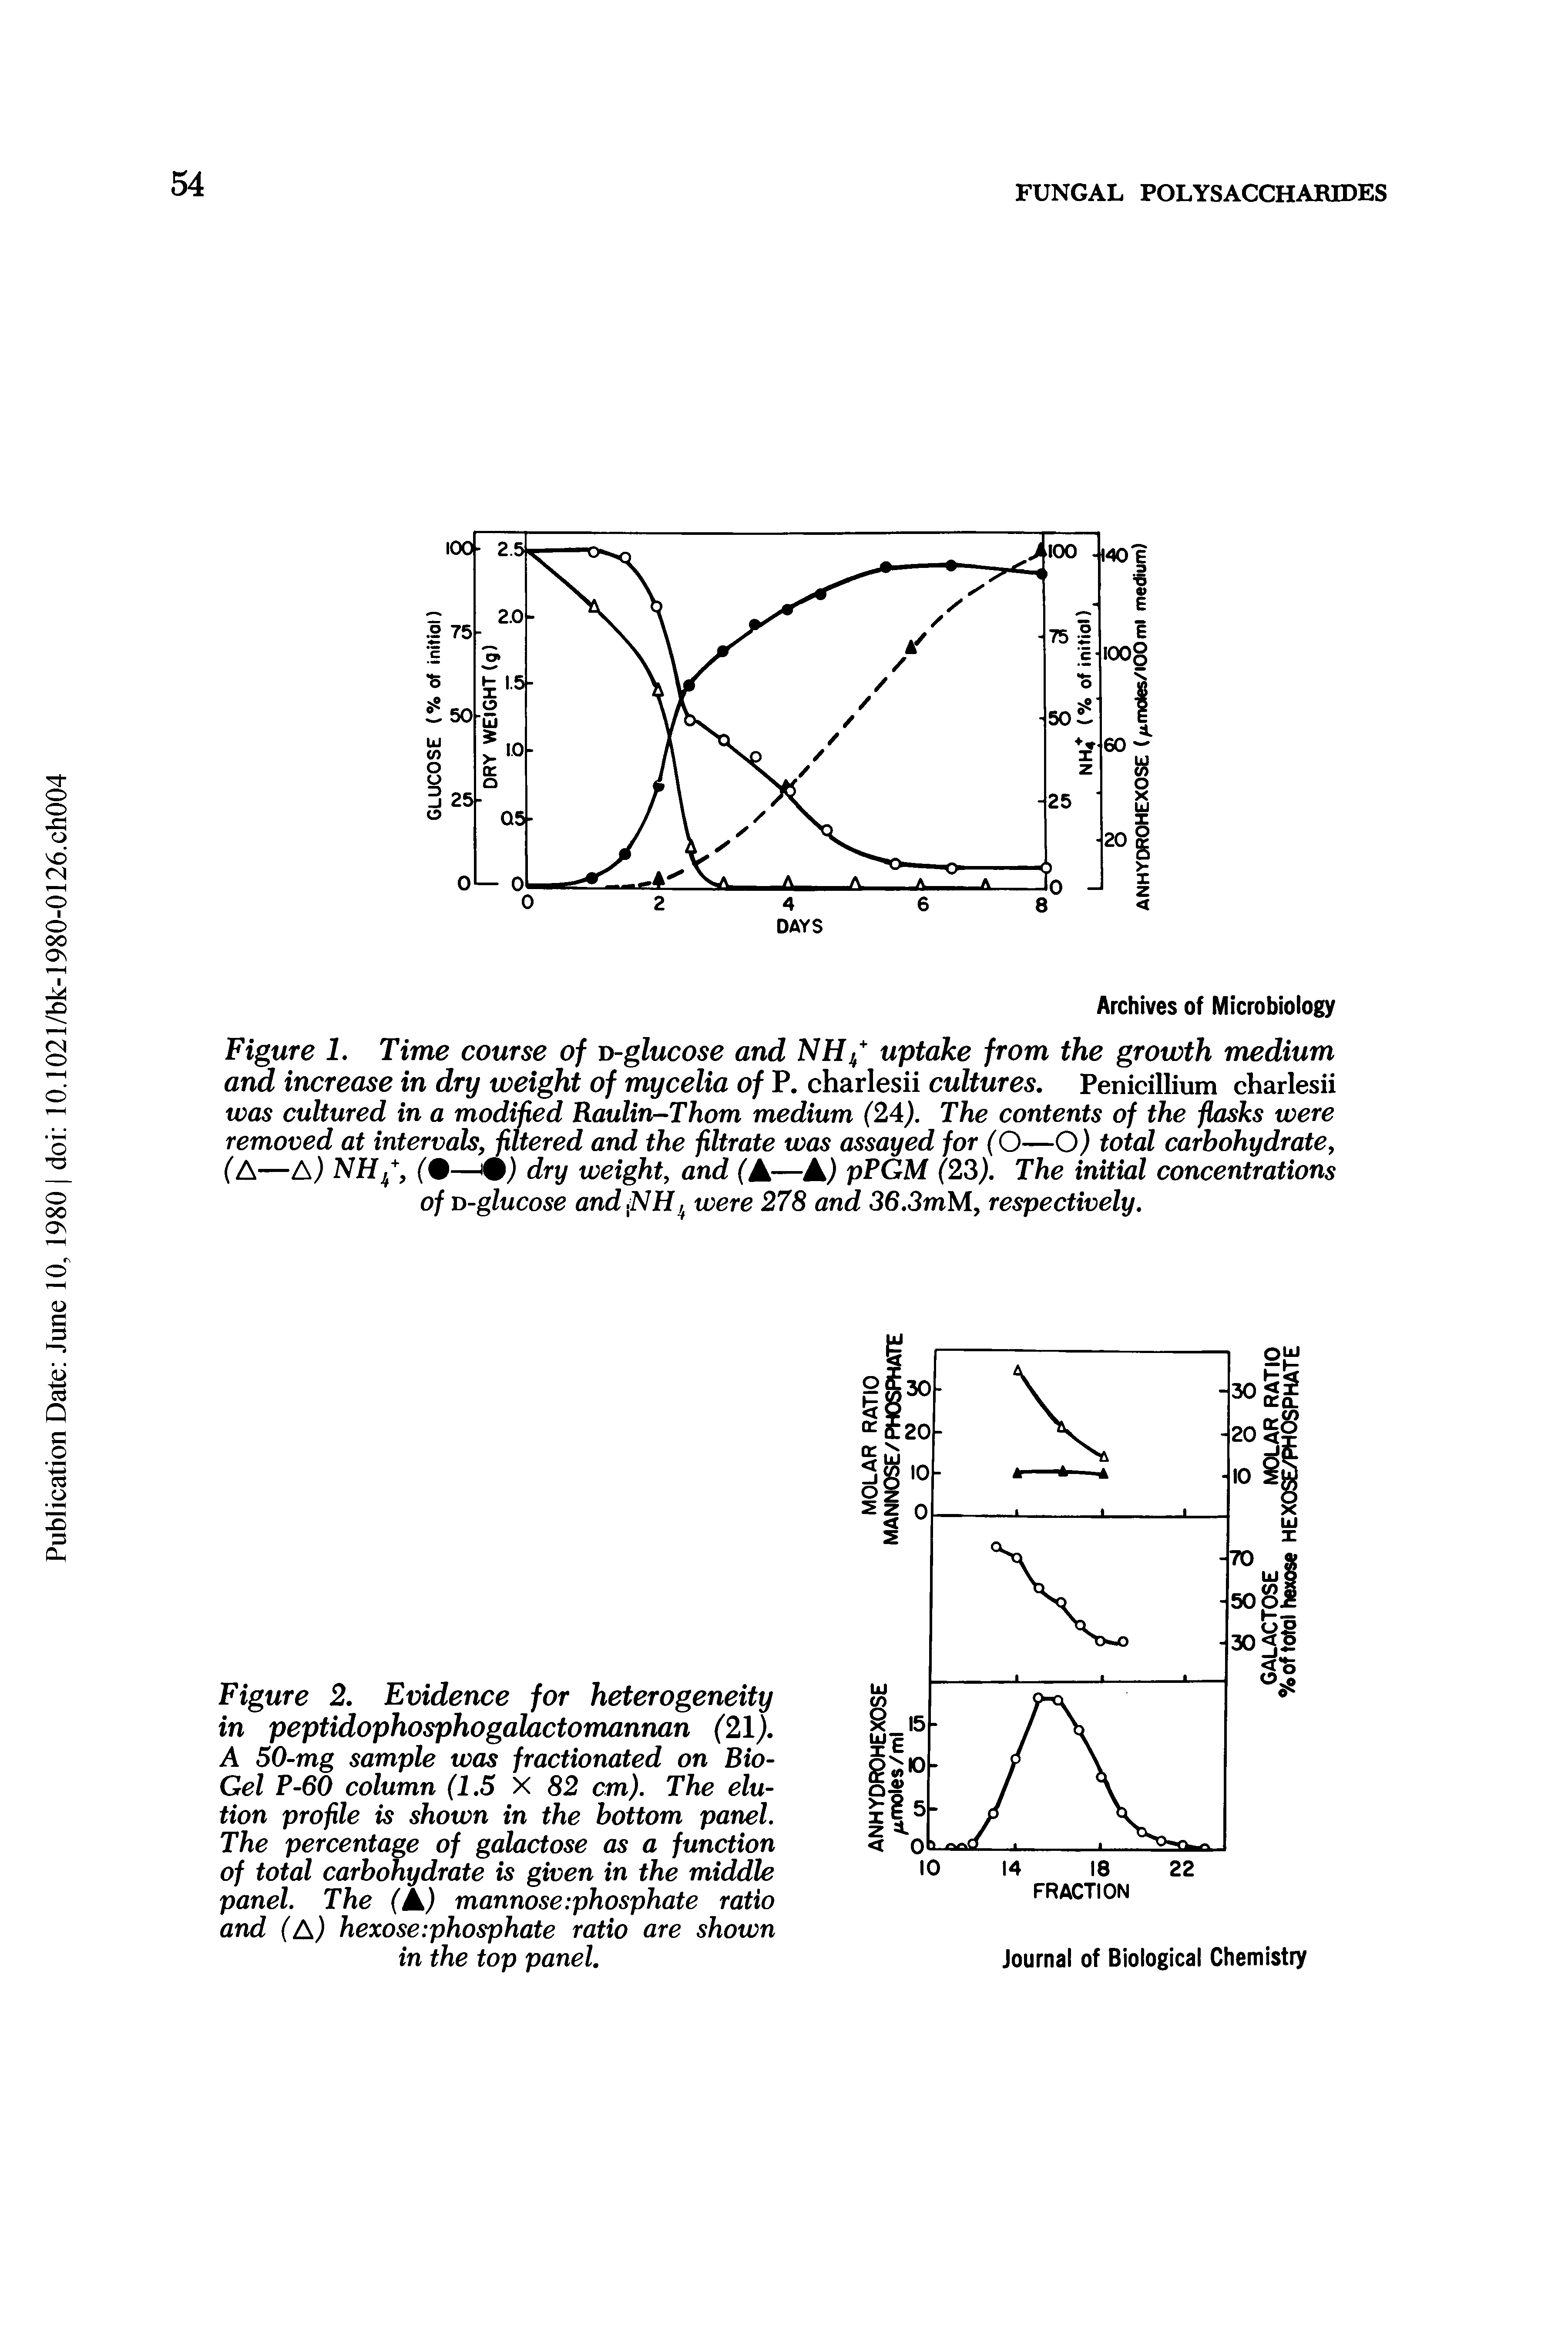 Figure 1. Time course of o-glucose and uptake from the growth medium and increase in dry weight of mycelia of P. charlesii cultures, Penicillium charlesii was cultured in a modified Raulin-Thom medium (24). The contents of the flasks were removed at intervals, filtered and the filtrate was assayed for (O—O) total carbohydrate, (A—A) dry weight, and (A—A) pPGM (23). The initial concentrations...